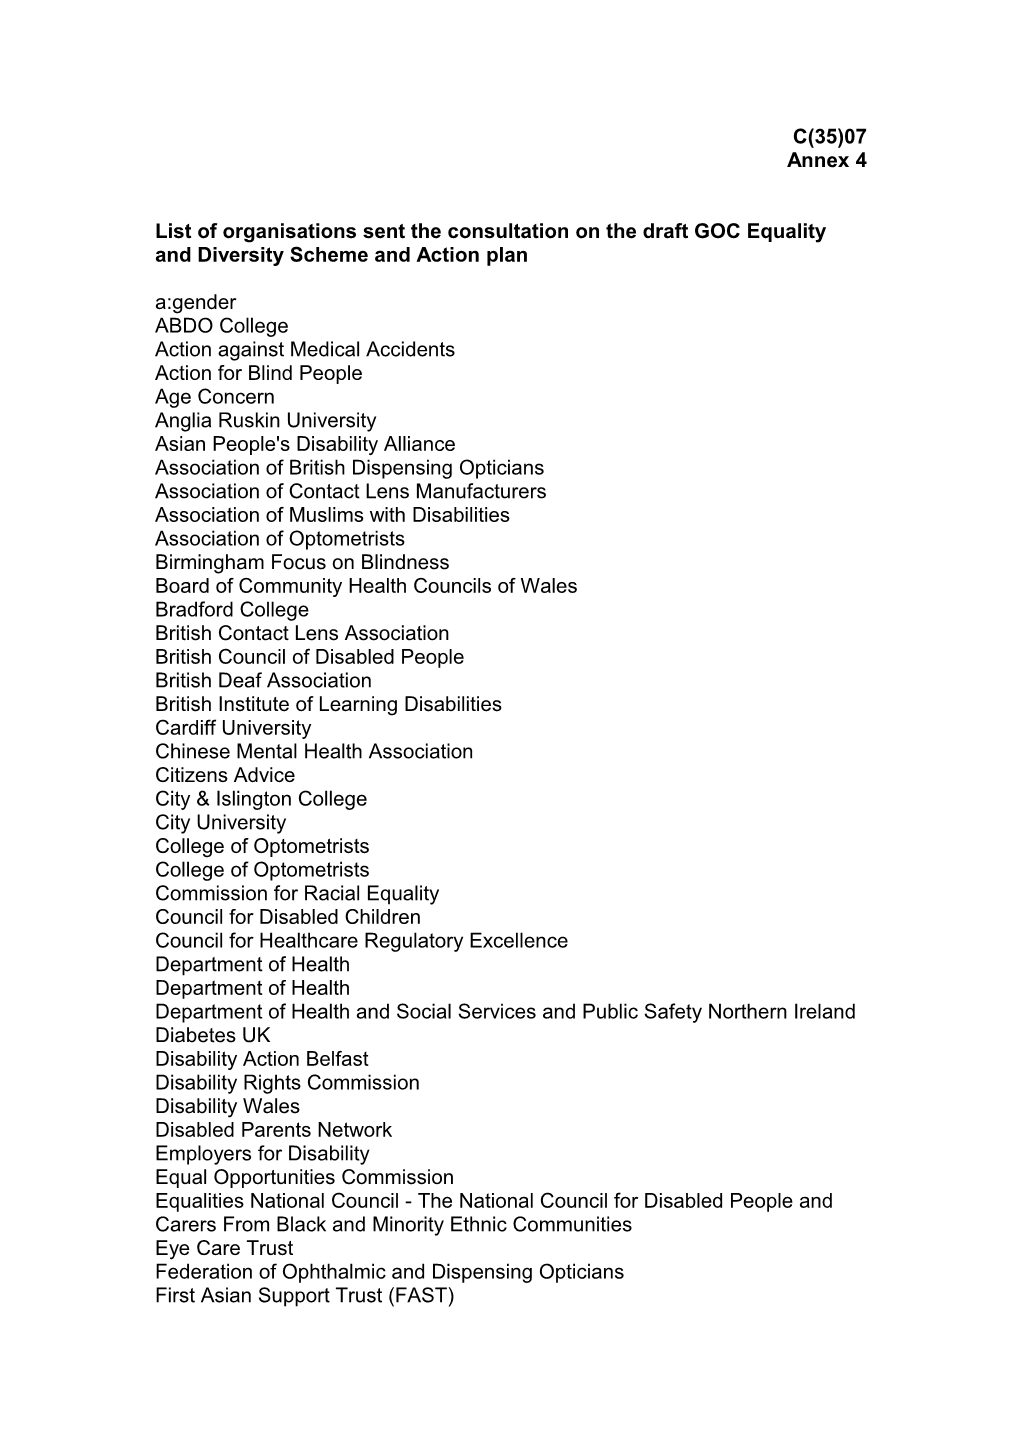 List of Organisations Sent the Consultation on the Draft GOC Equality and Diversity Scheme